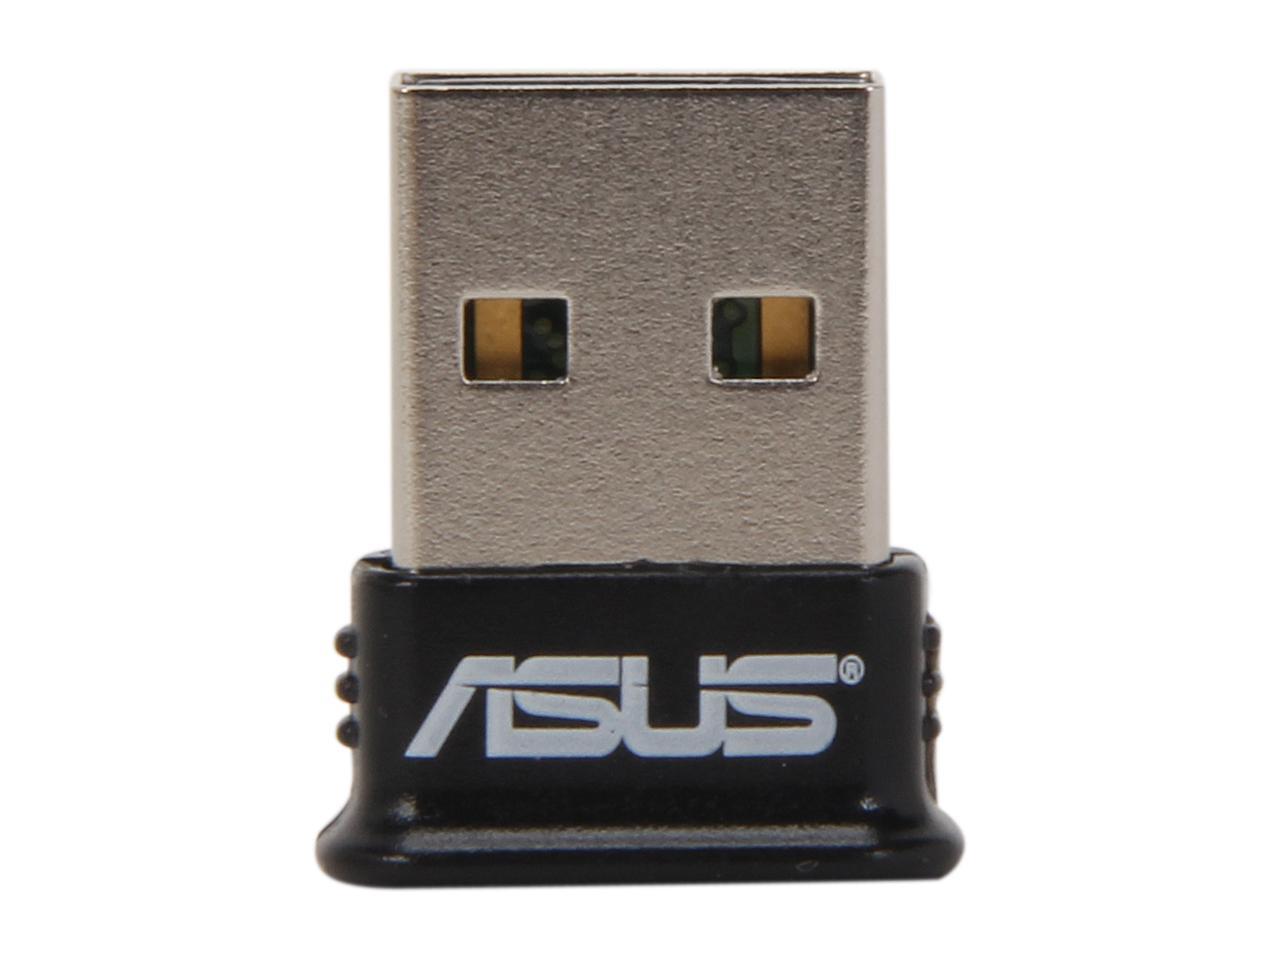 ASUS USB-BT400 USB Adapter w/ Bluetooth Dongle Receiver, Laptop & PC Support, Windows 10 Plug and Play /8/7/XP, Printers, Phones, Headsets, Speakers, Keyboards, Controllers - image 2 of 6